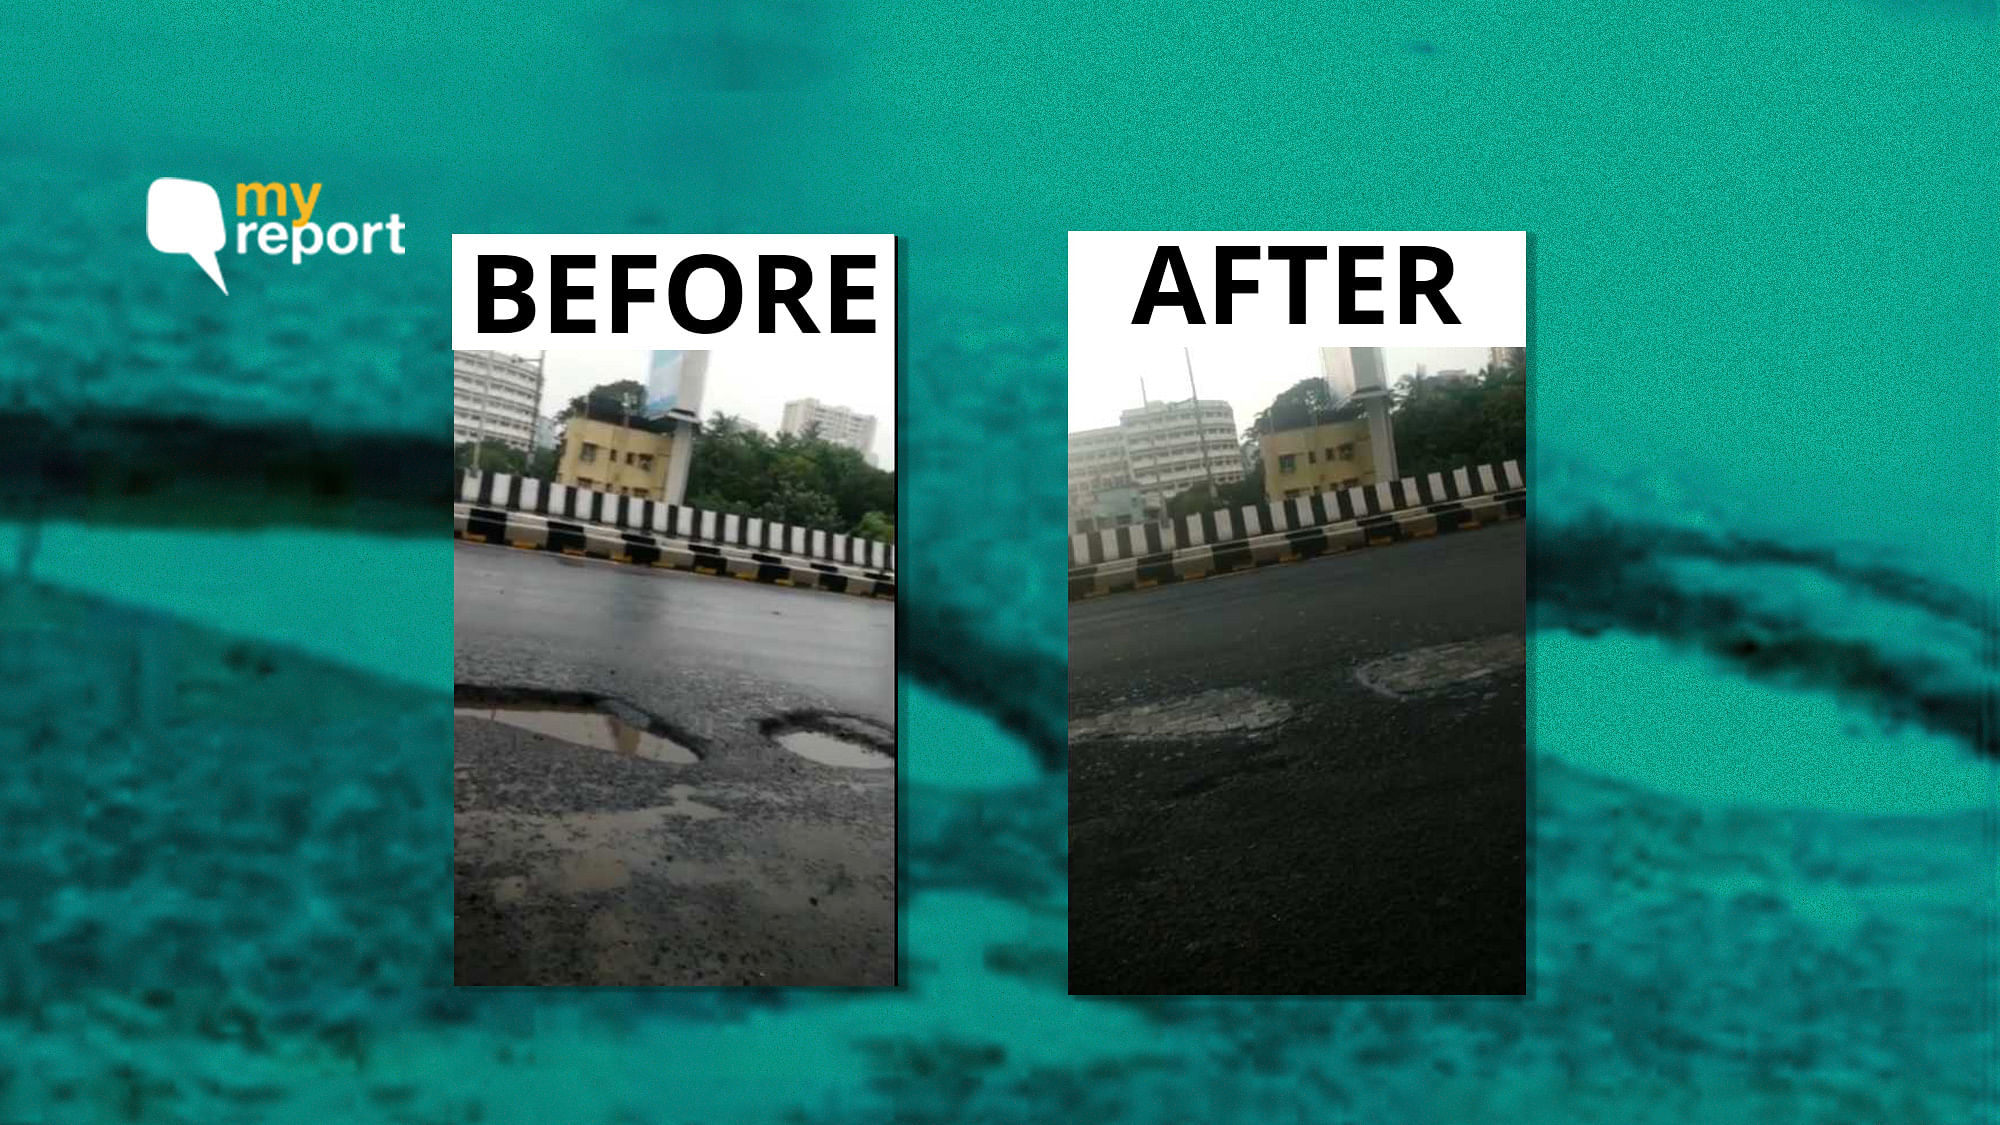 The pothole, which was about four-and-a-half metres long, was fixed within a day.